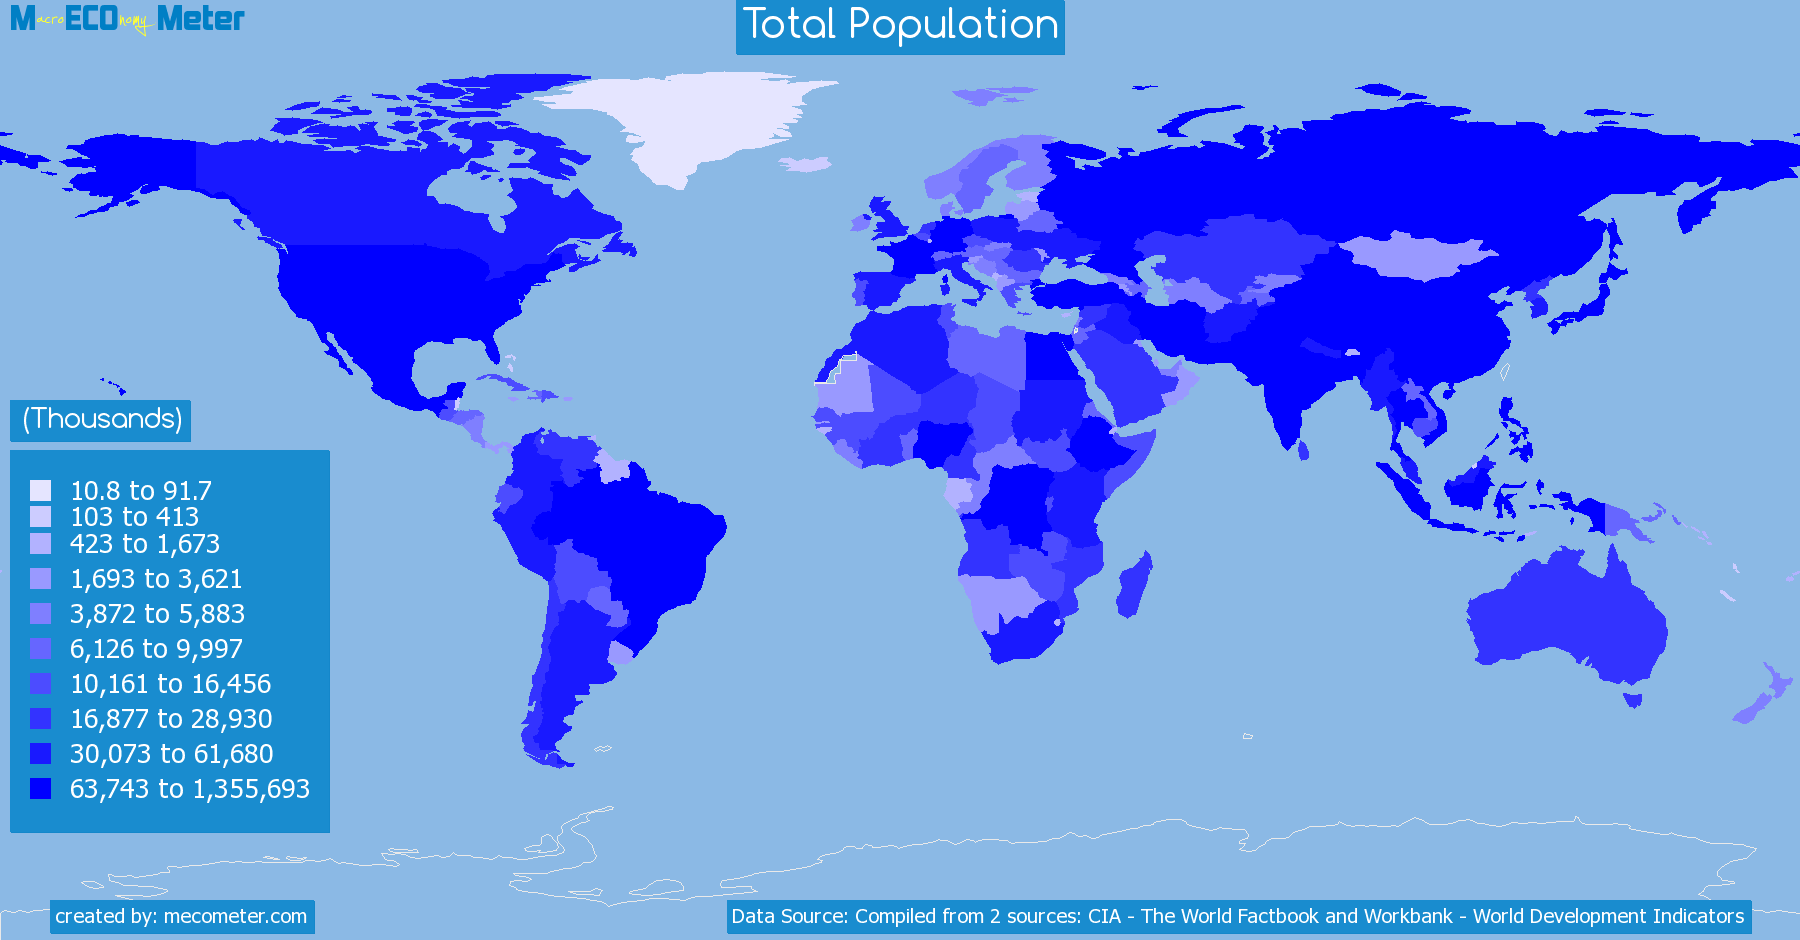 Worldmap of all countries colored to reflect the values of Total Population